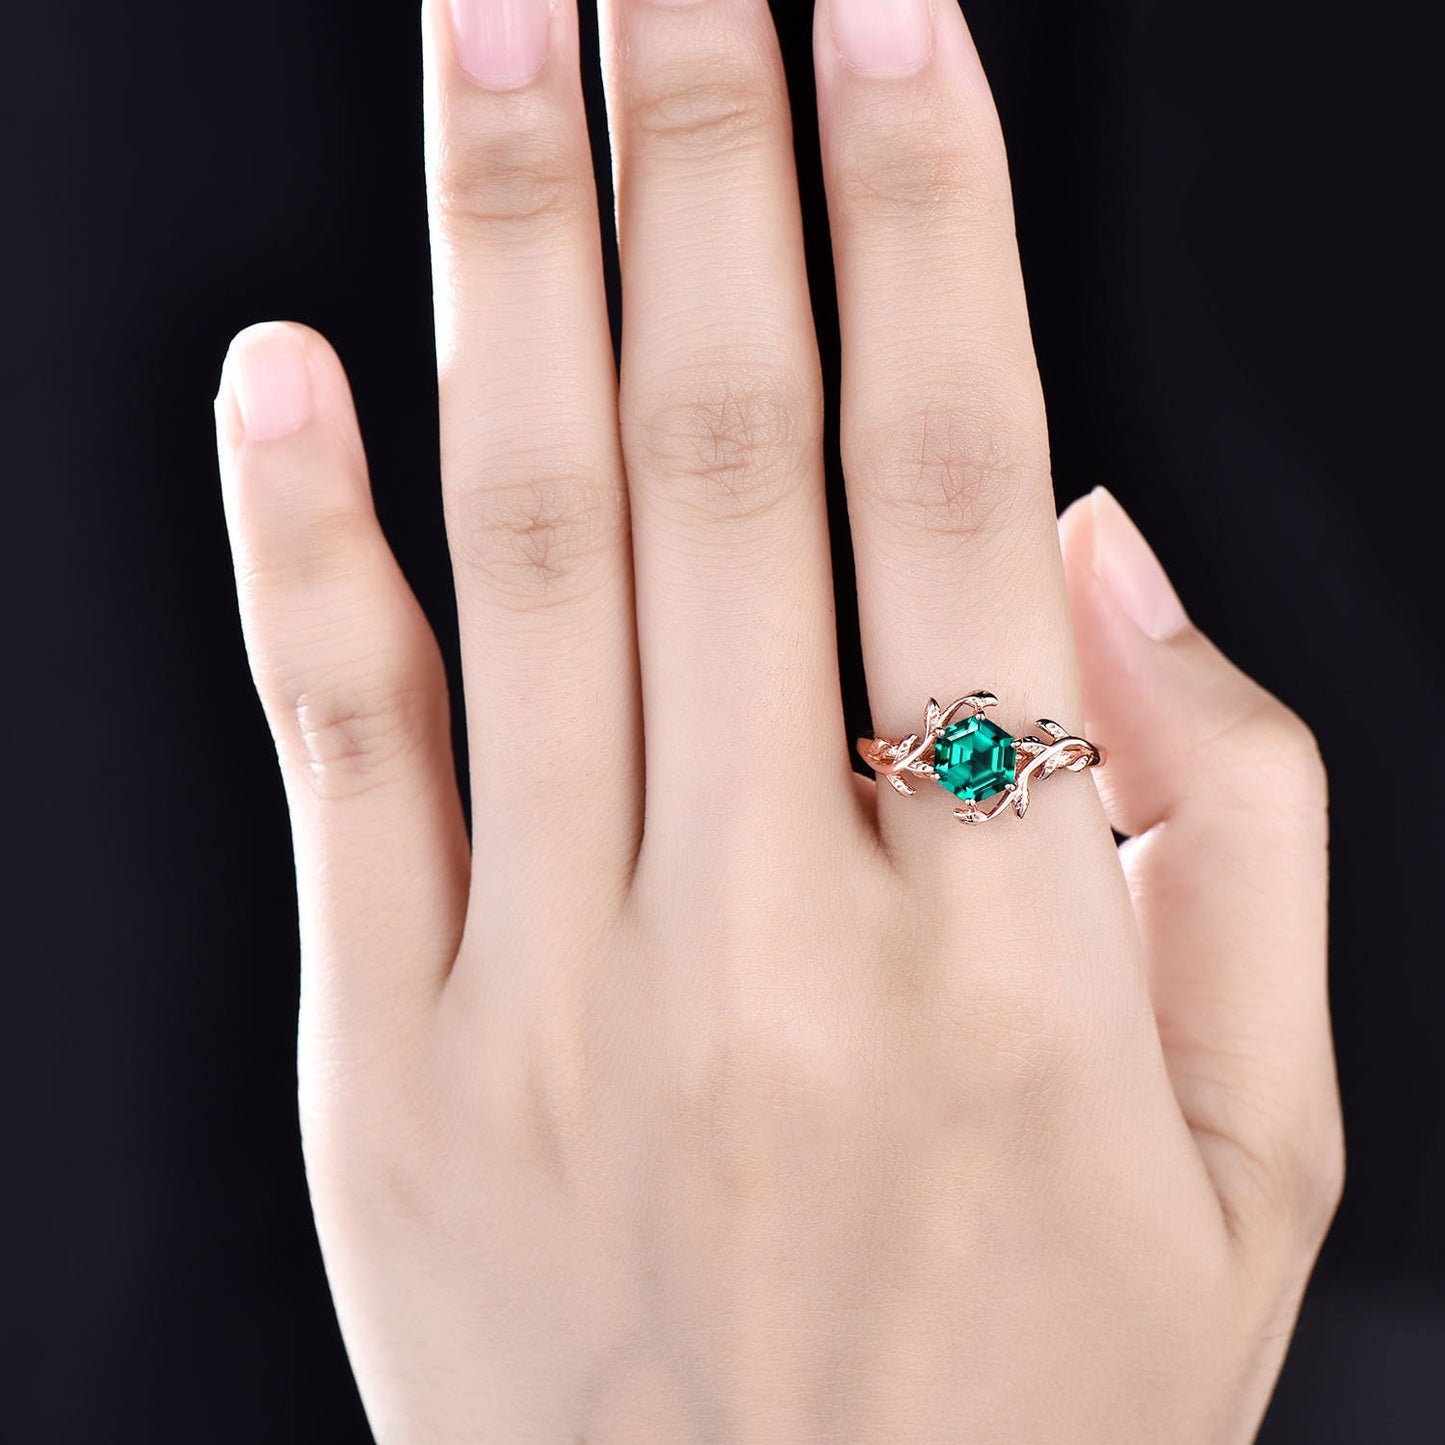 Vintage Hexagon cut emerald engagement ring leaf flower ring solitaire 14k rose gold emerald ring for women unique anniversary wedding ring